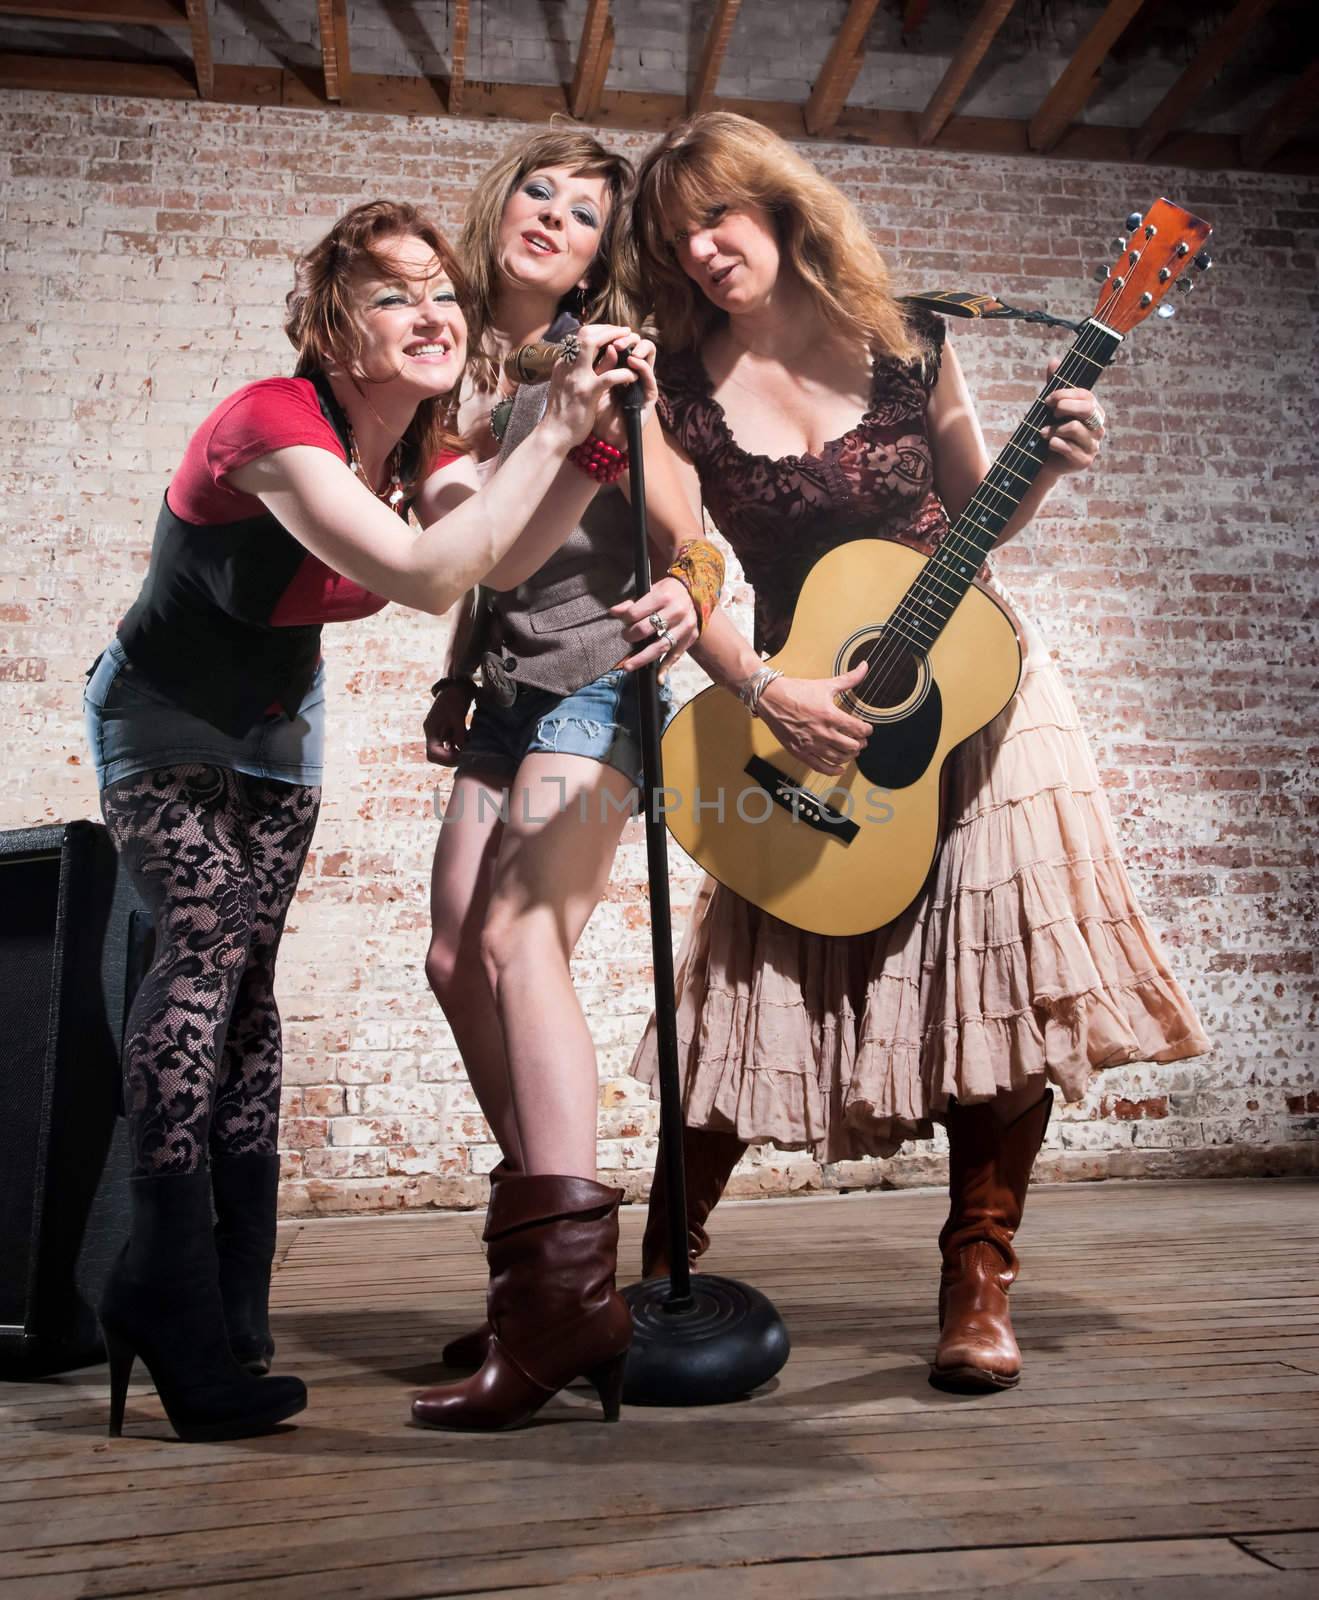 All-girl trio performing in stylish clothing at a warehouse